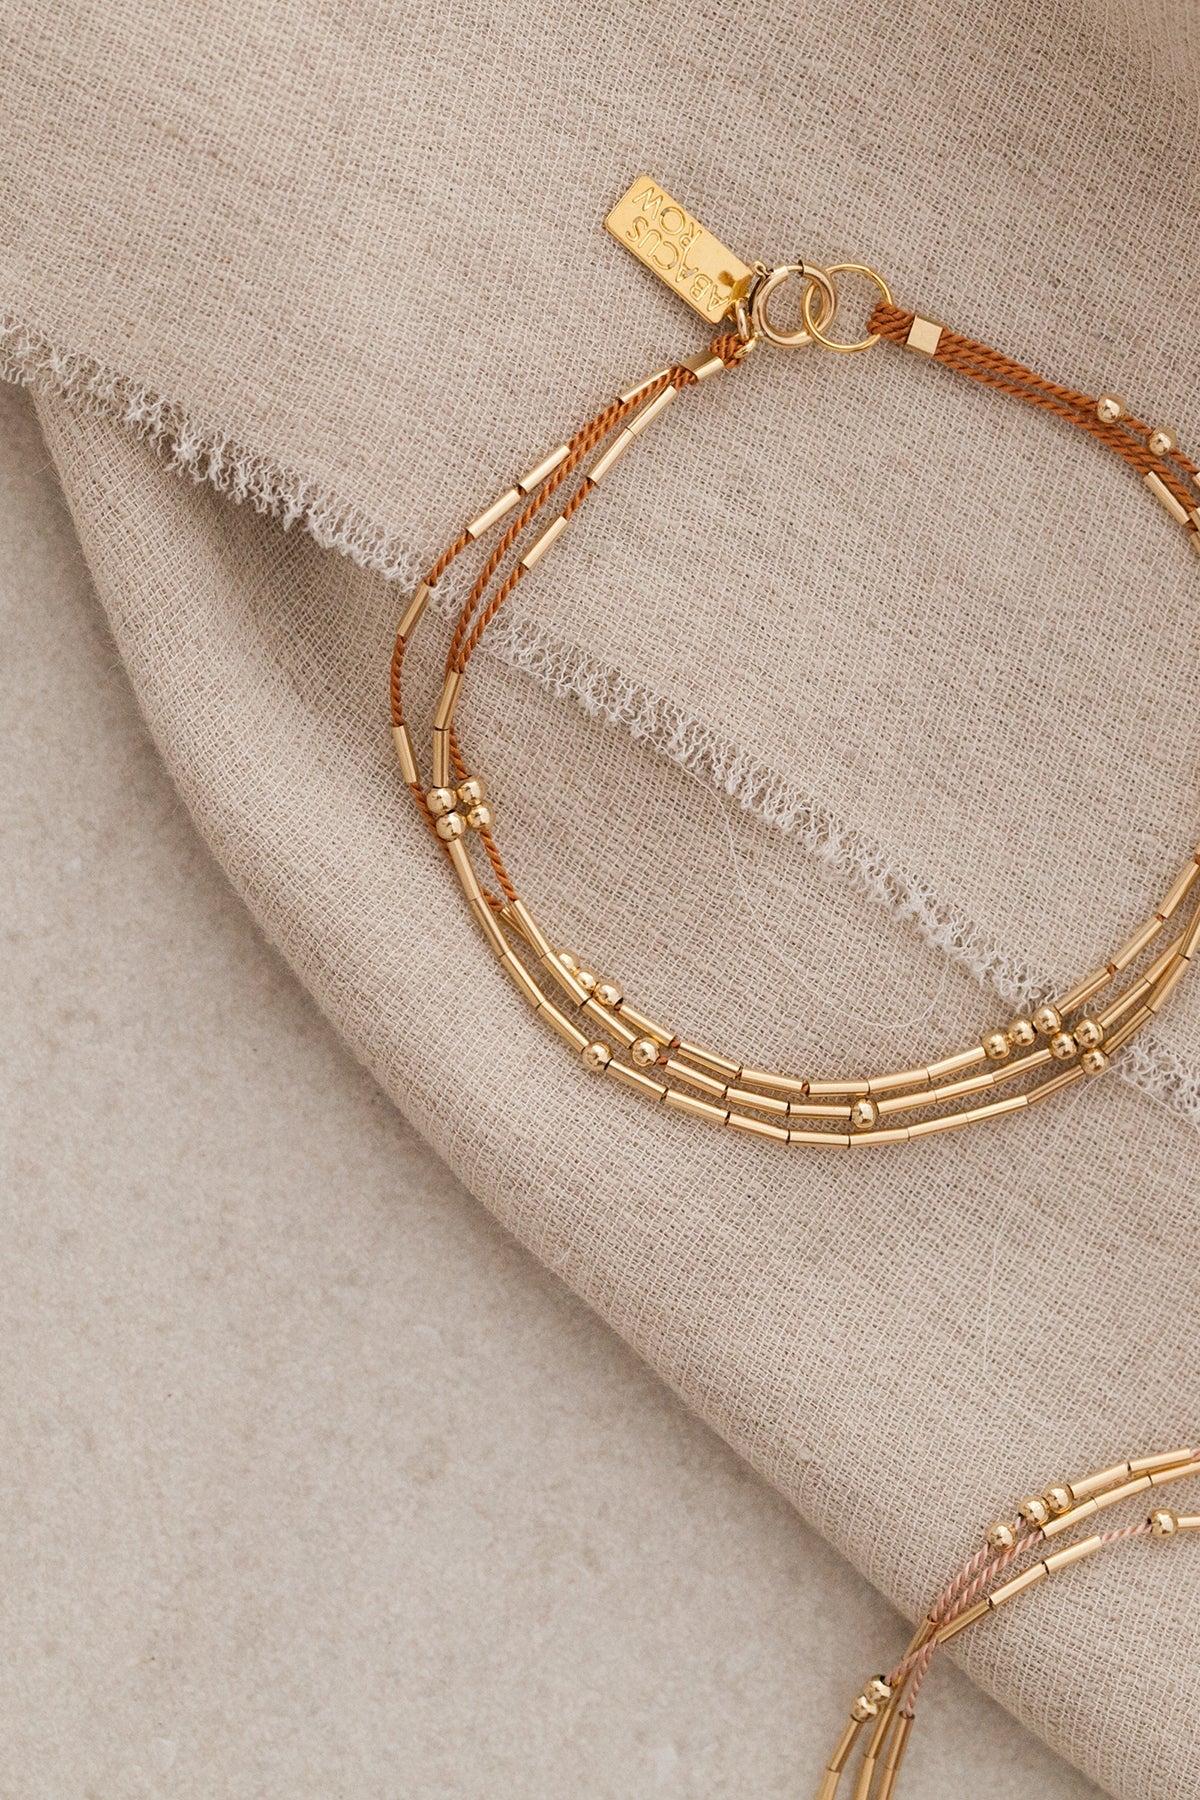 A refined and effortless bracelet designed to elevate your day-to-day. The Ara is a triple-stranded silk cord bracelet stacked with gold tubes and rounds that shift freely.